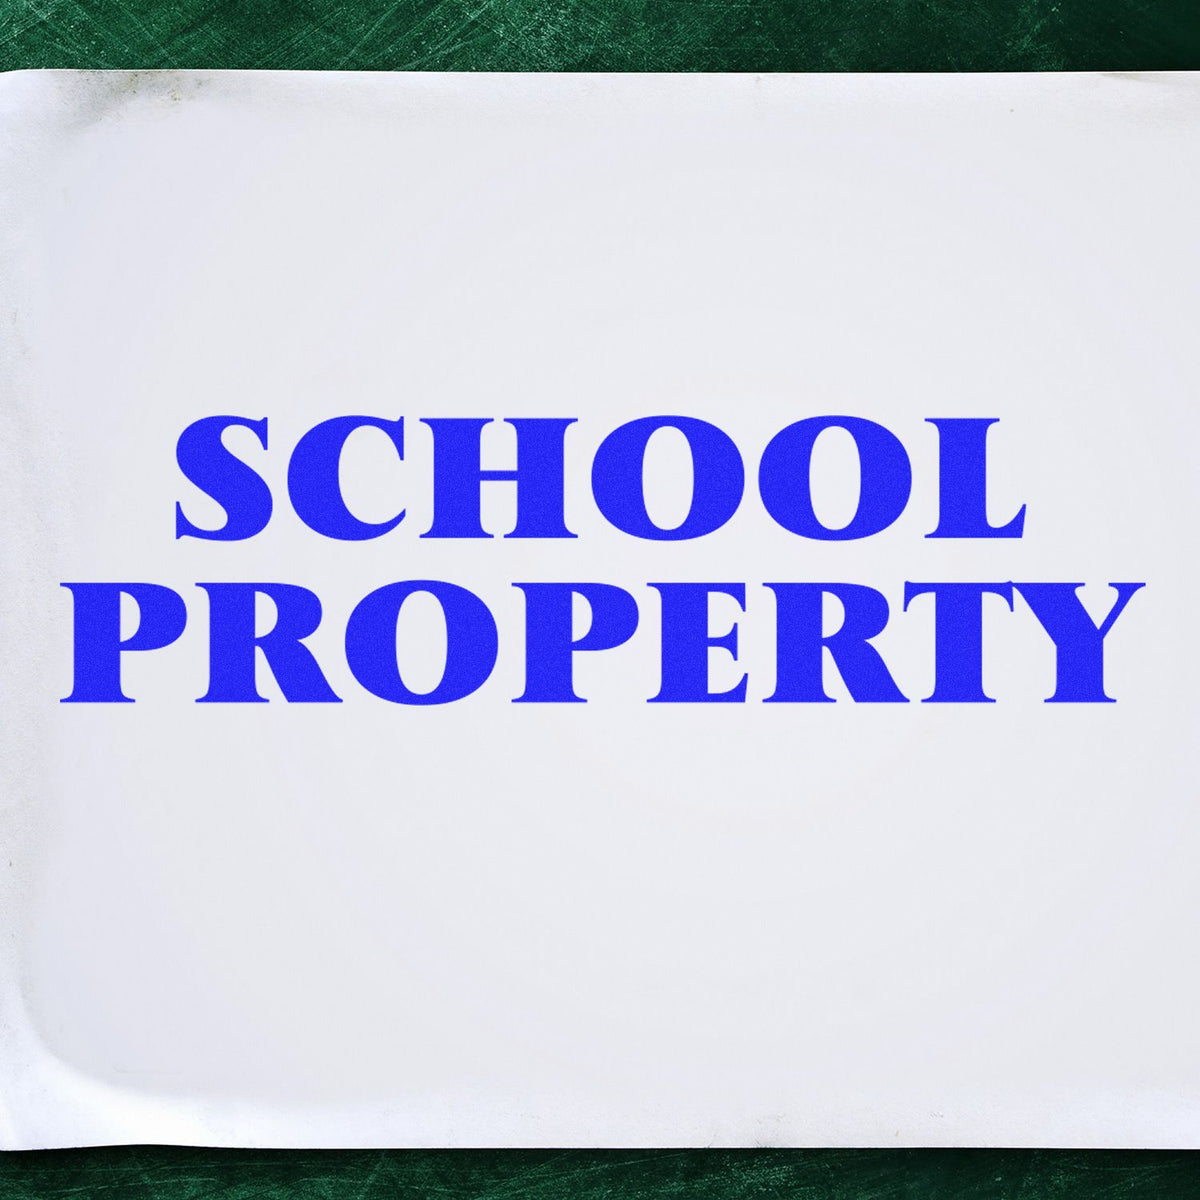 Large School Property Rubber Stamp In Use Photo